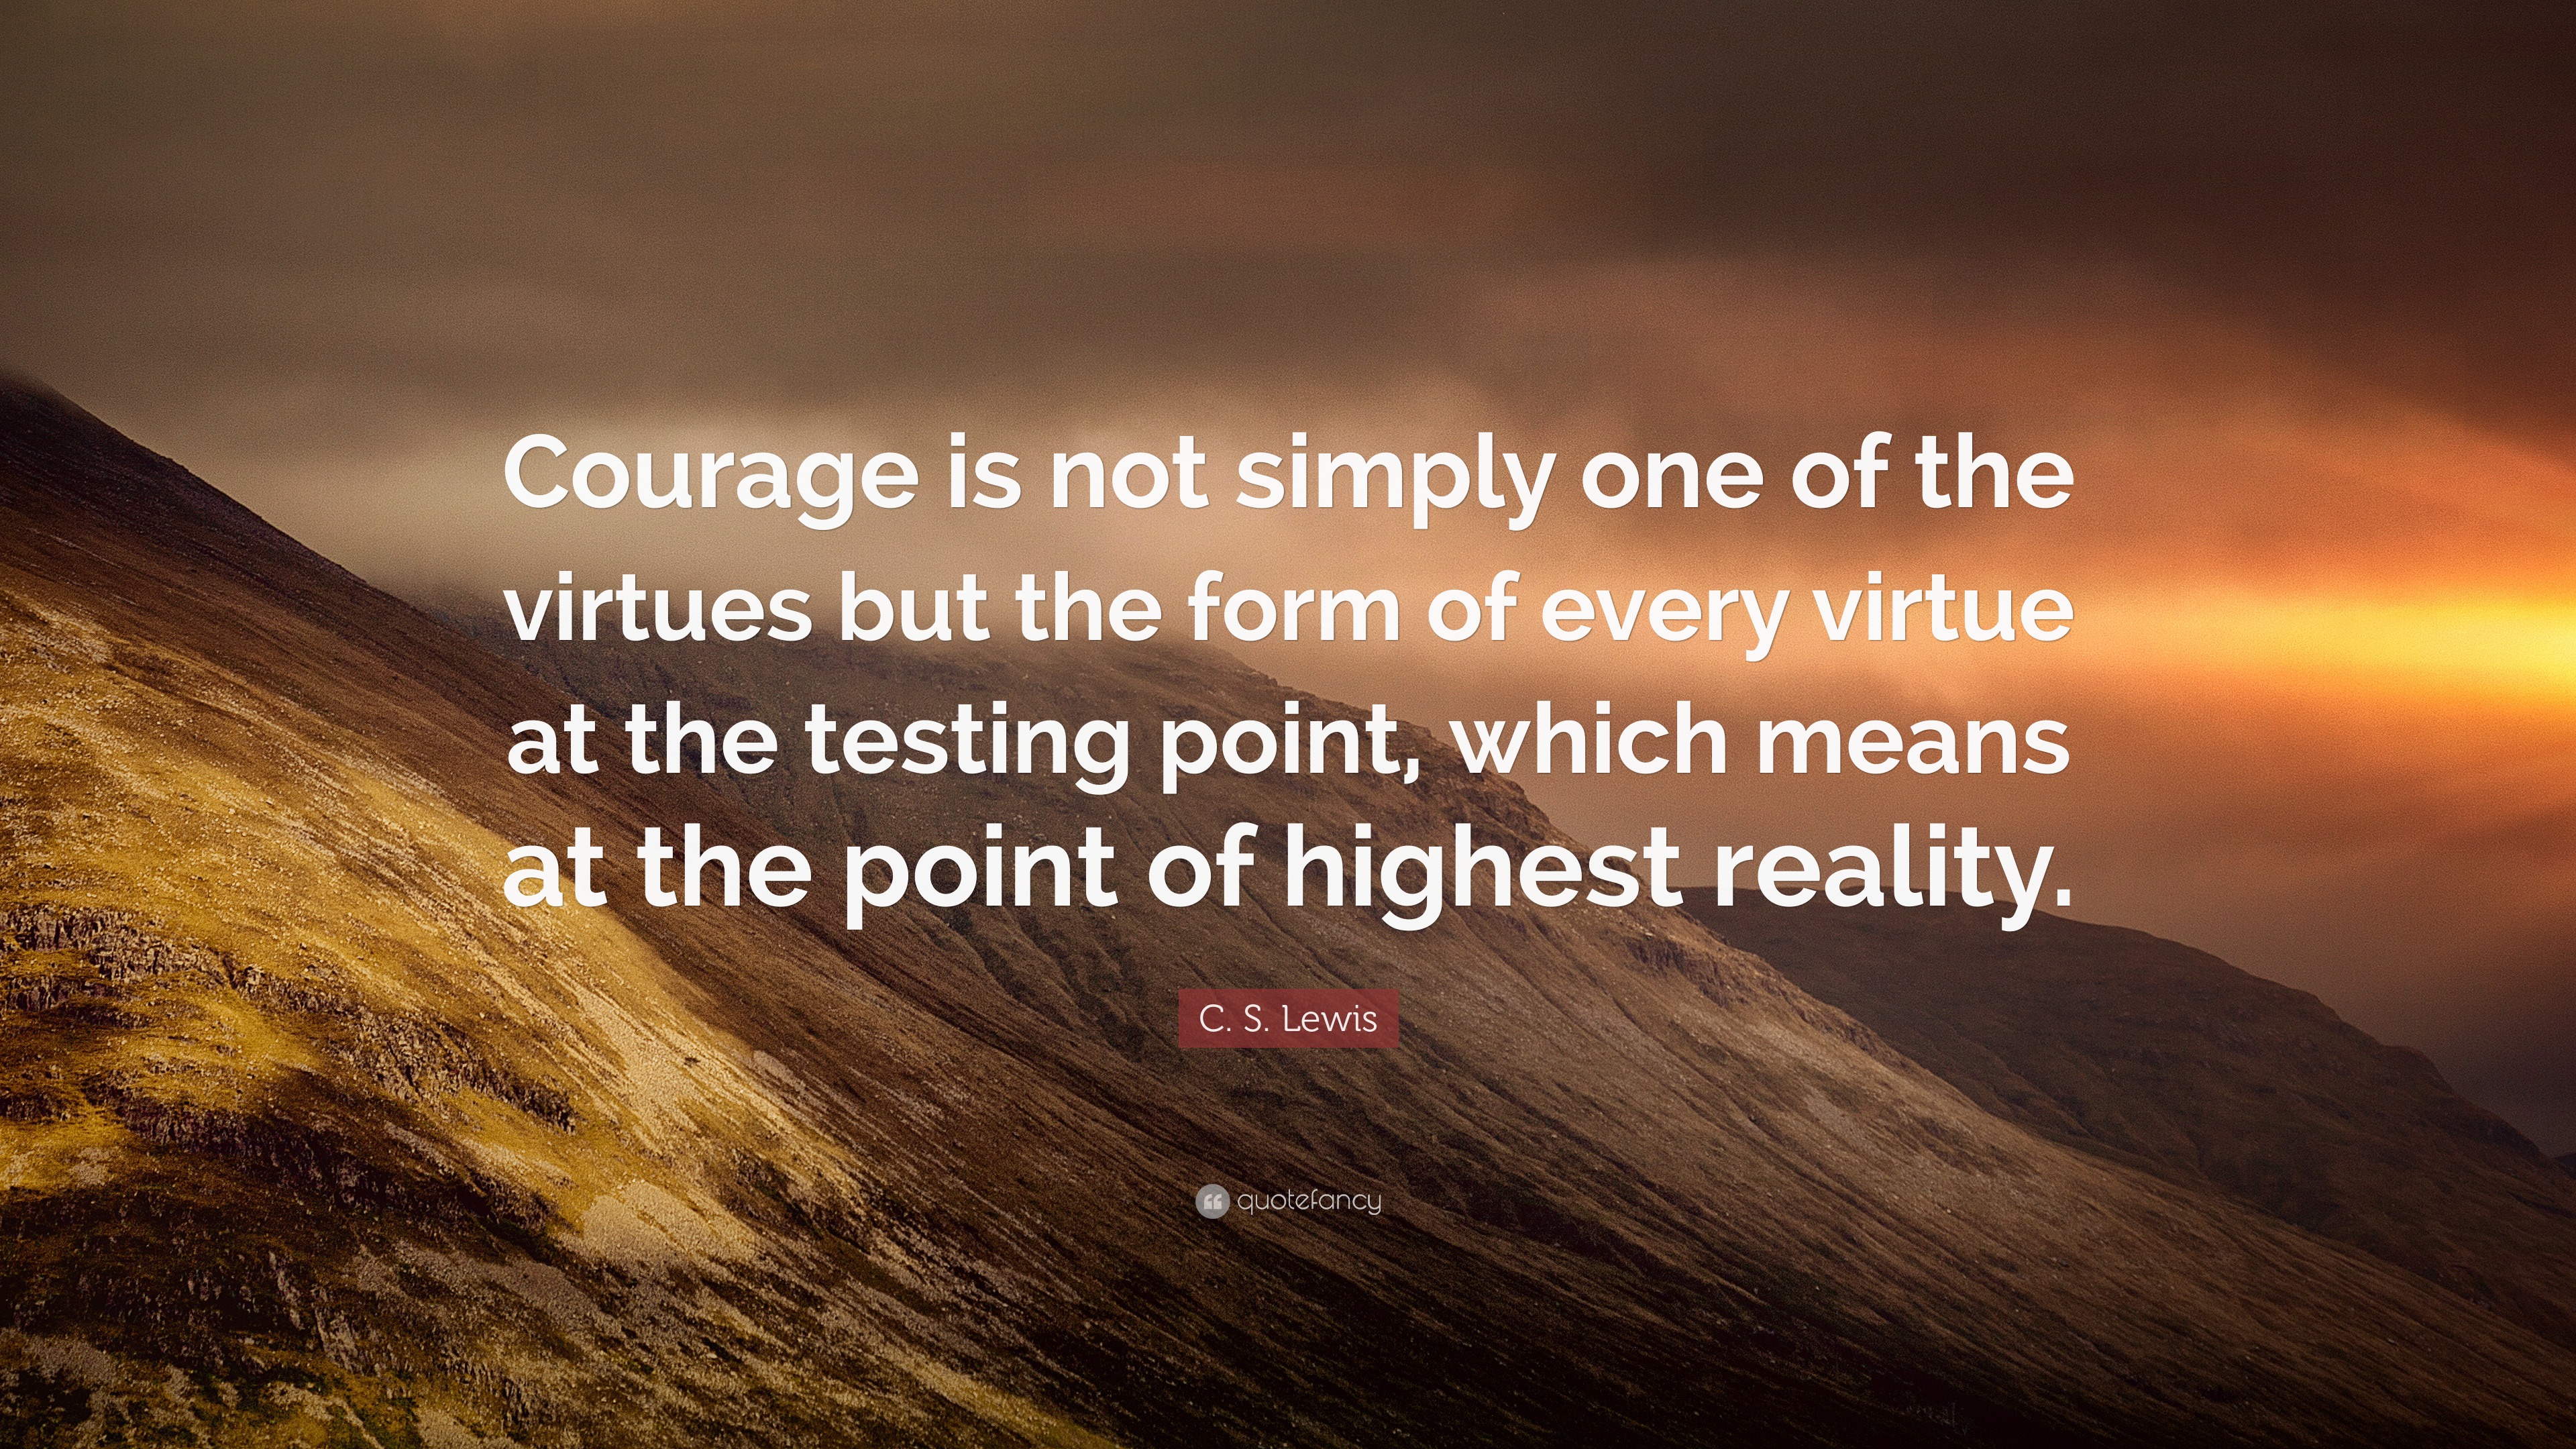 C. S. Lewis Quote: “Courage is not simply one of the virtues but the ...